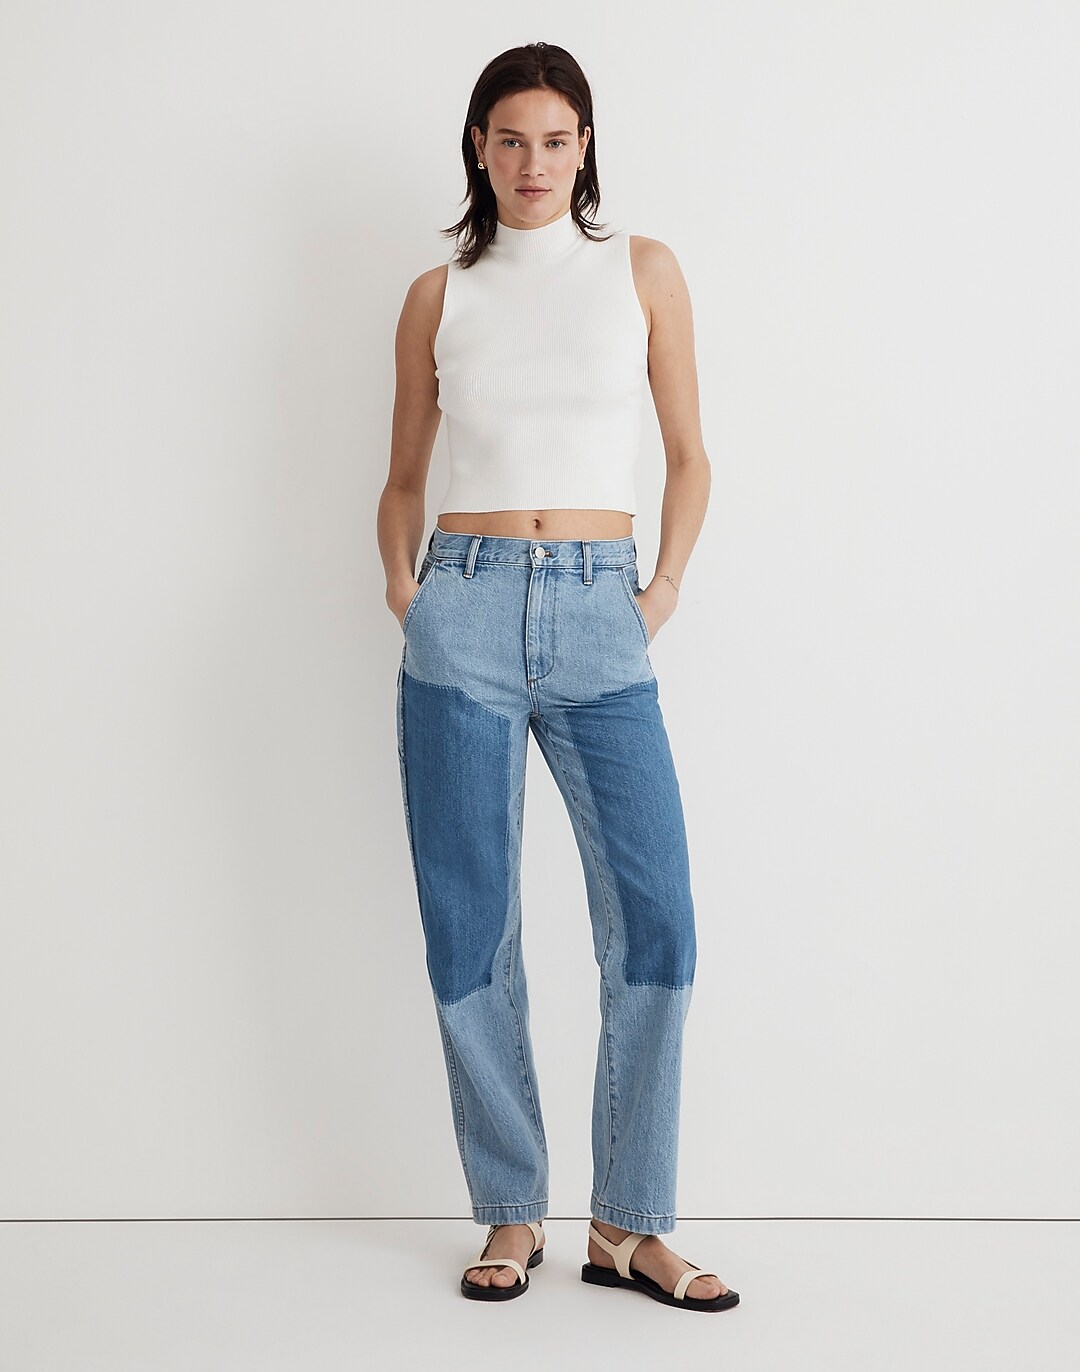 An honest review of Madewell The '90s Straight Jean - Cheryl Shops